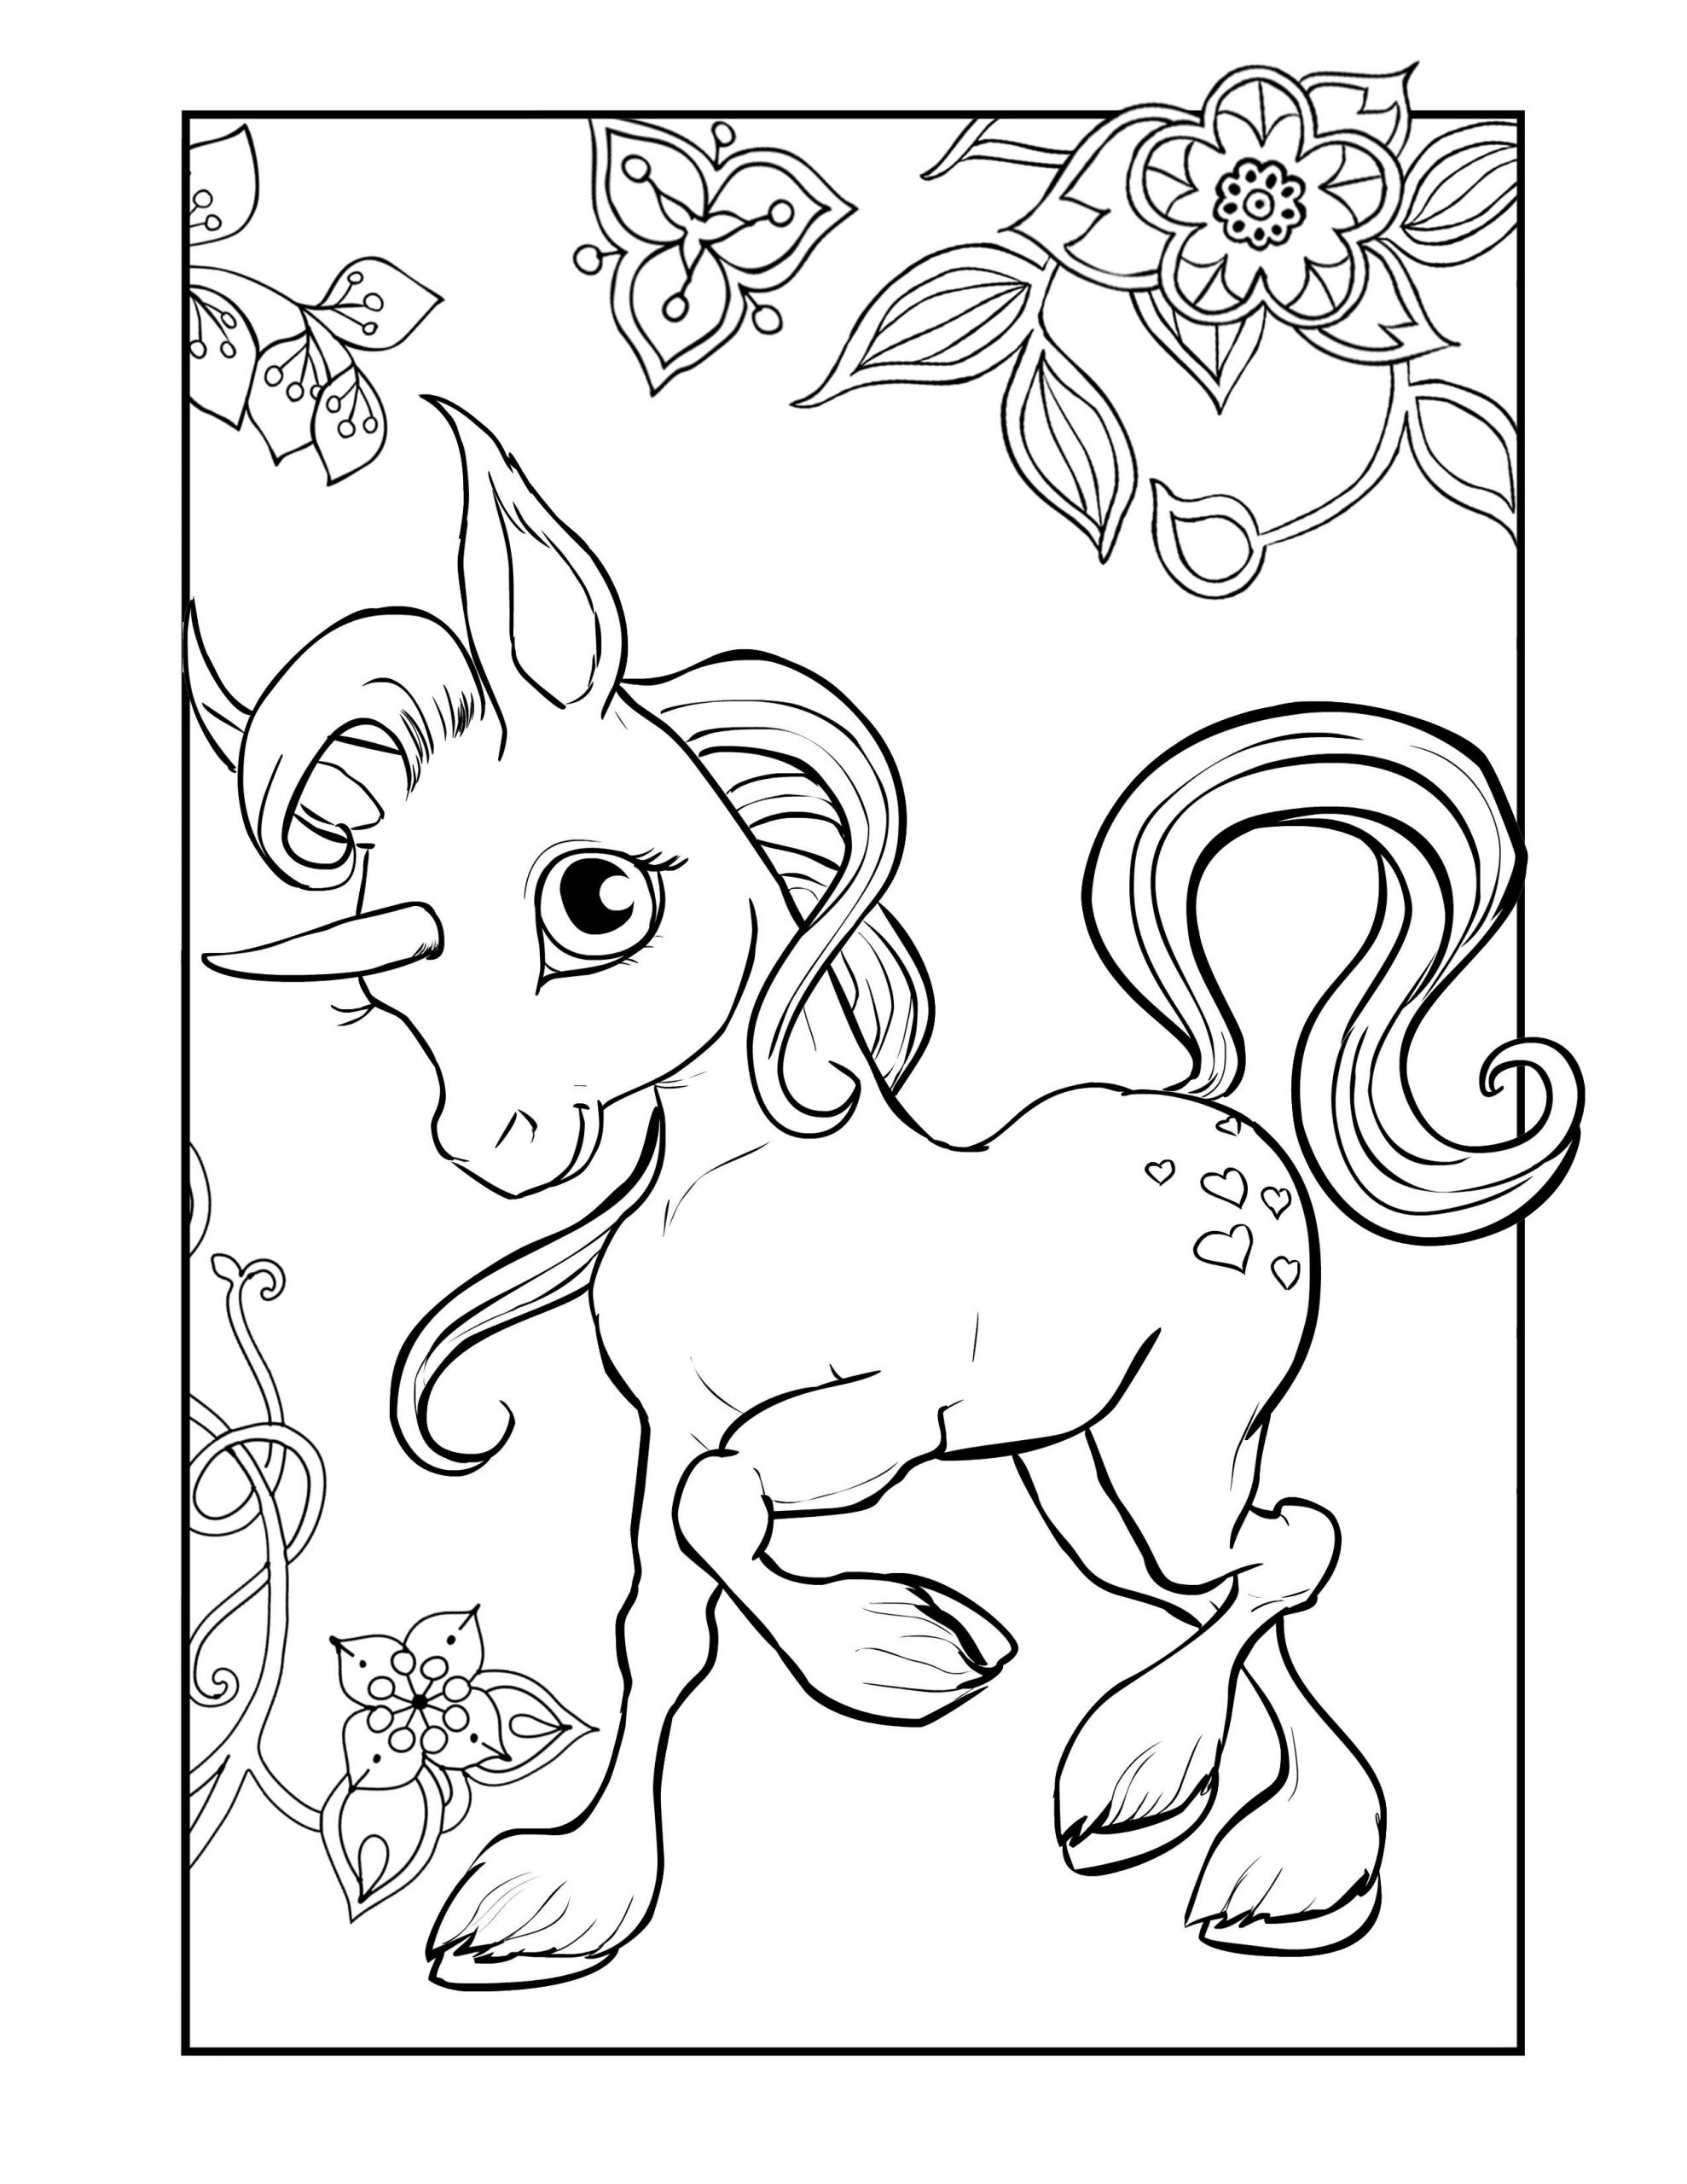 Top 25 Unicorn Coloring Pages for Girls - Home, Family ...